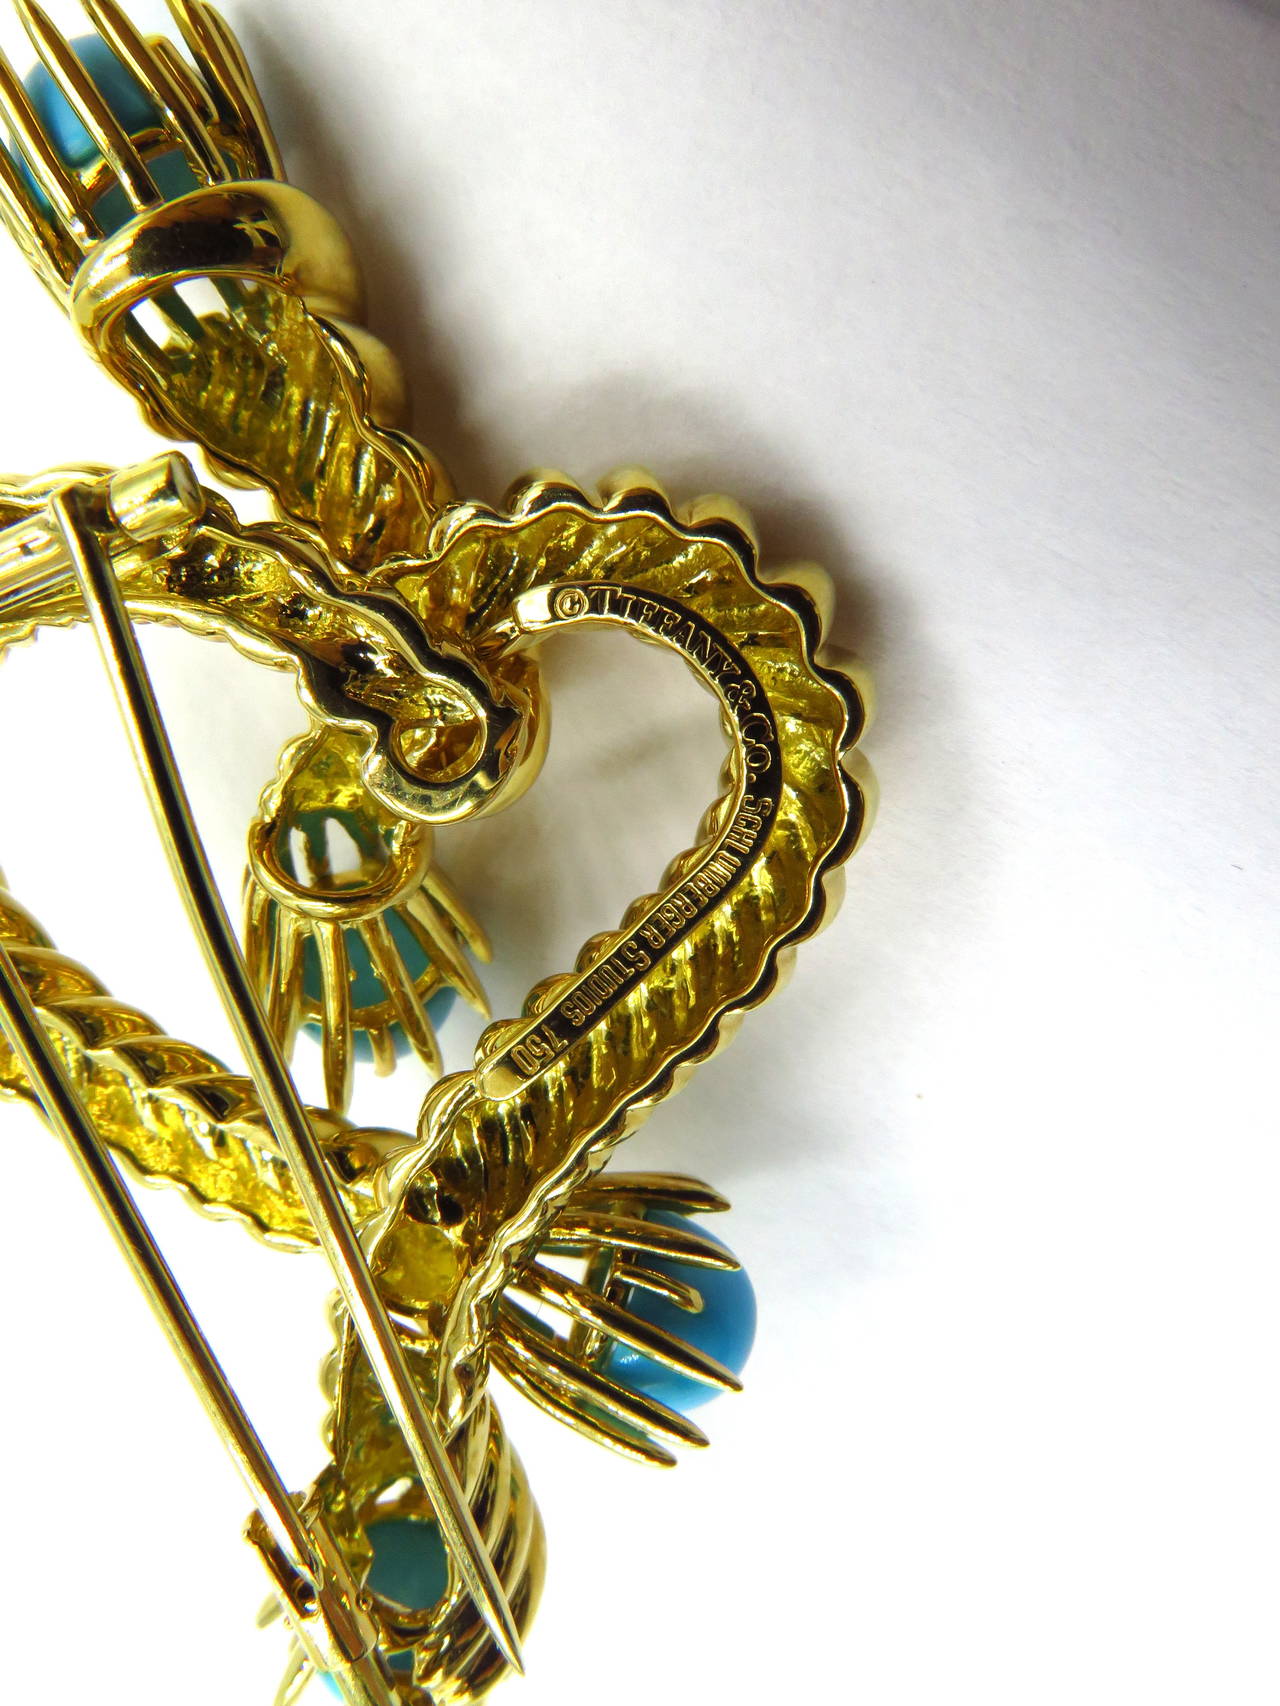  Tiffany & Co. Schlumberger Turquoise Gold Roped Heart Design Brooch 1